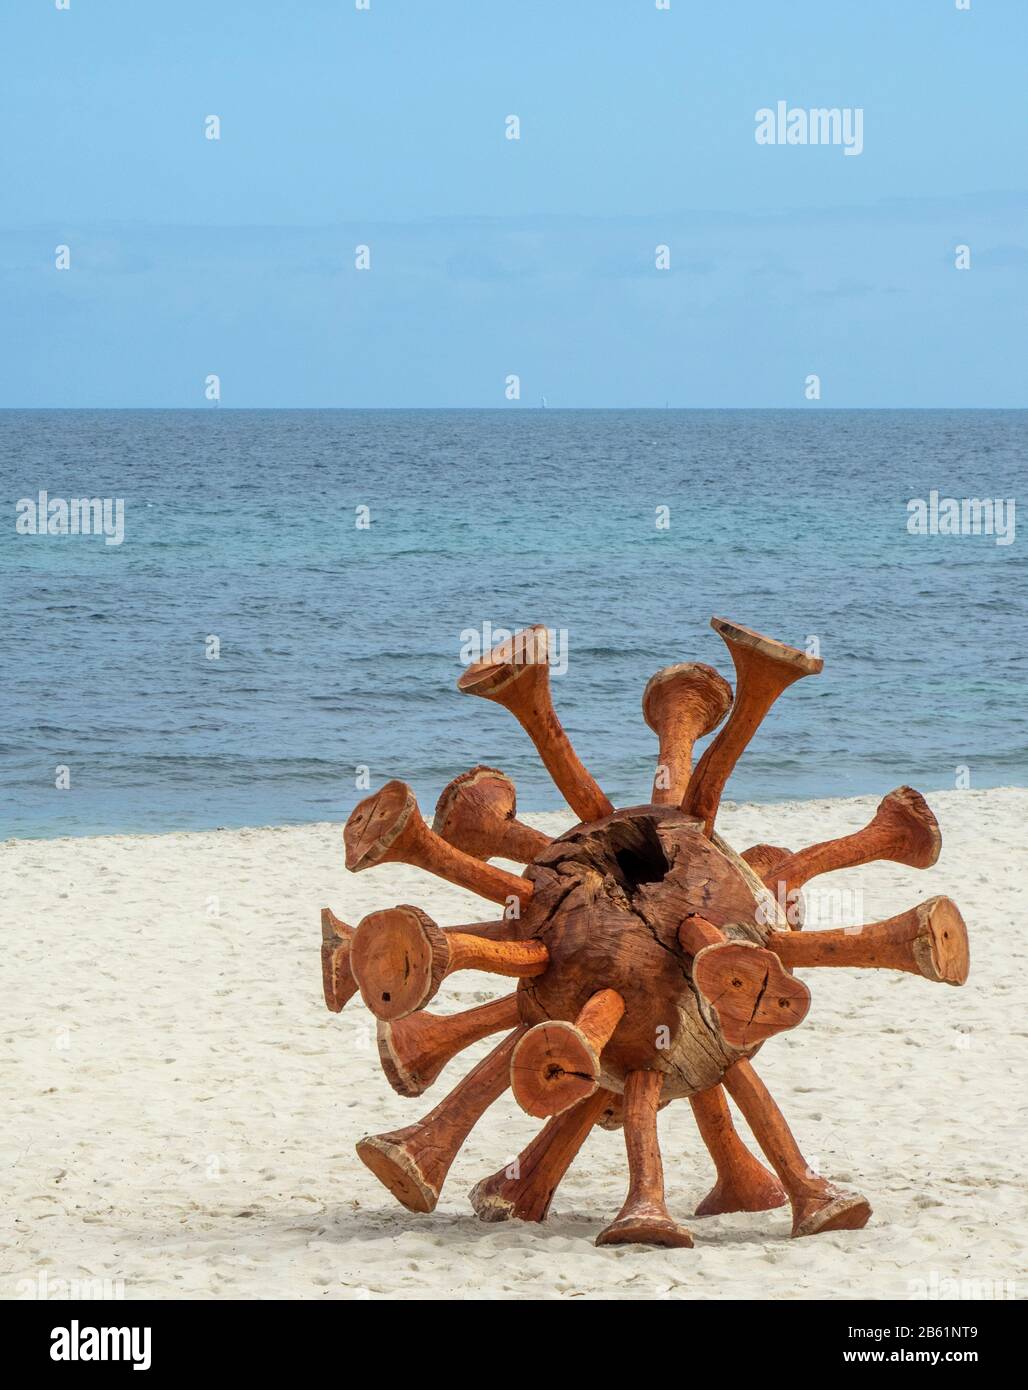 Wooden Viral Escapade by Marcus Tatton sculptor artist at Sculpture by the Sea exhibition Cottesloe Beach Perth WA Australia Stock Photo